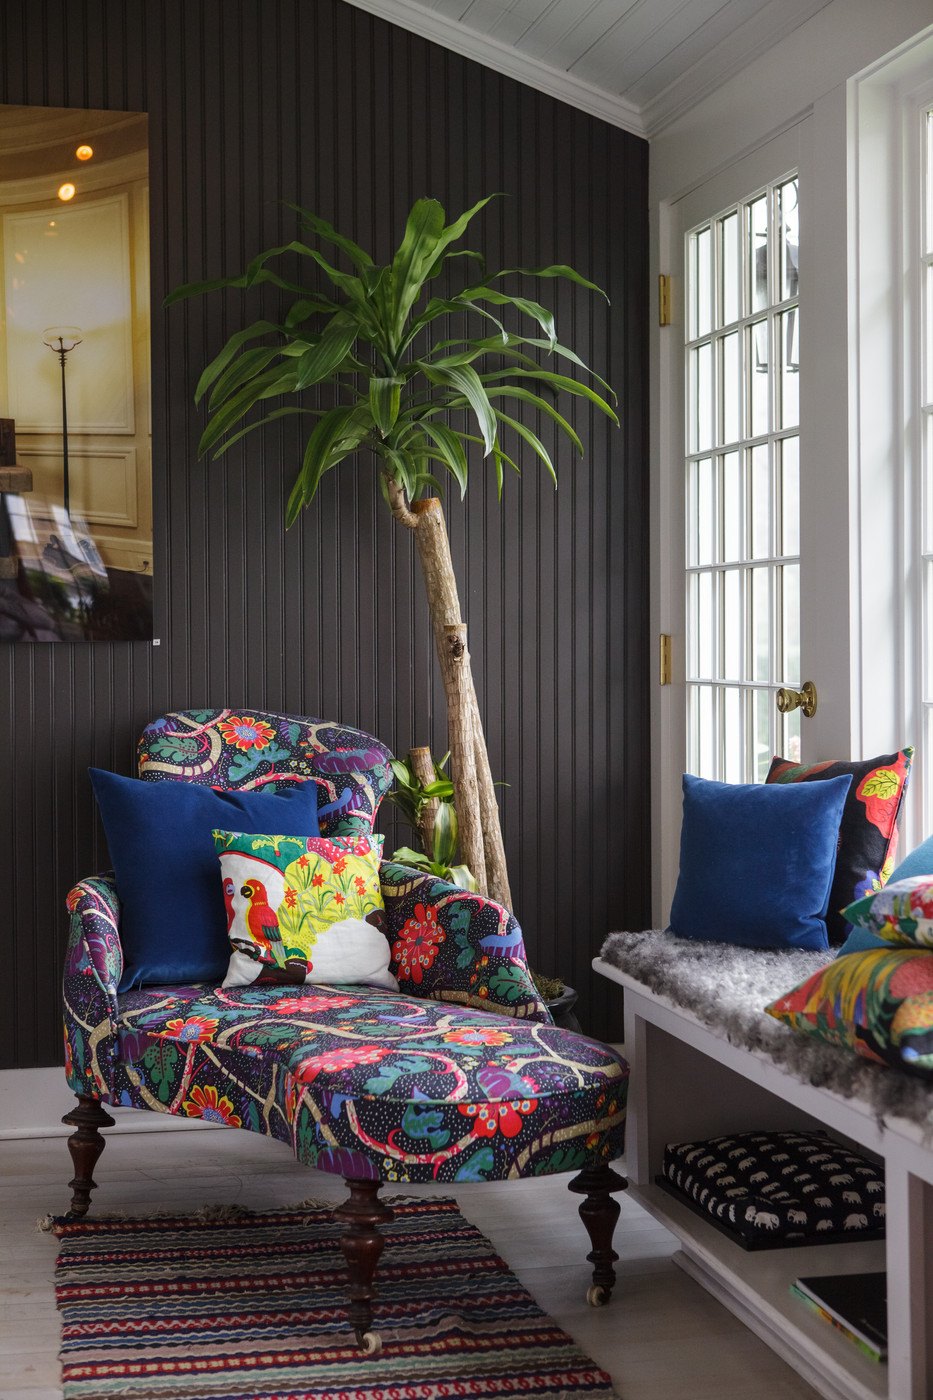 Vibrant patterns in a painted room with beadboard paneling